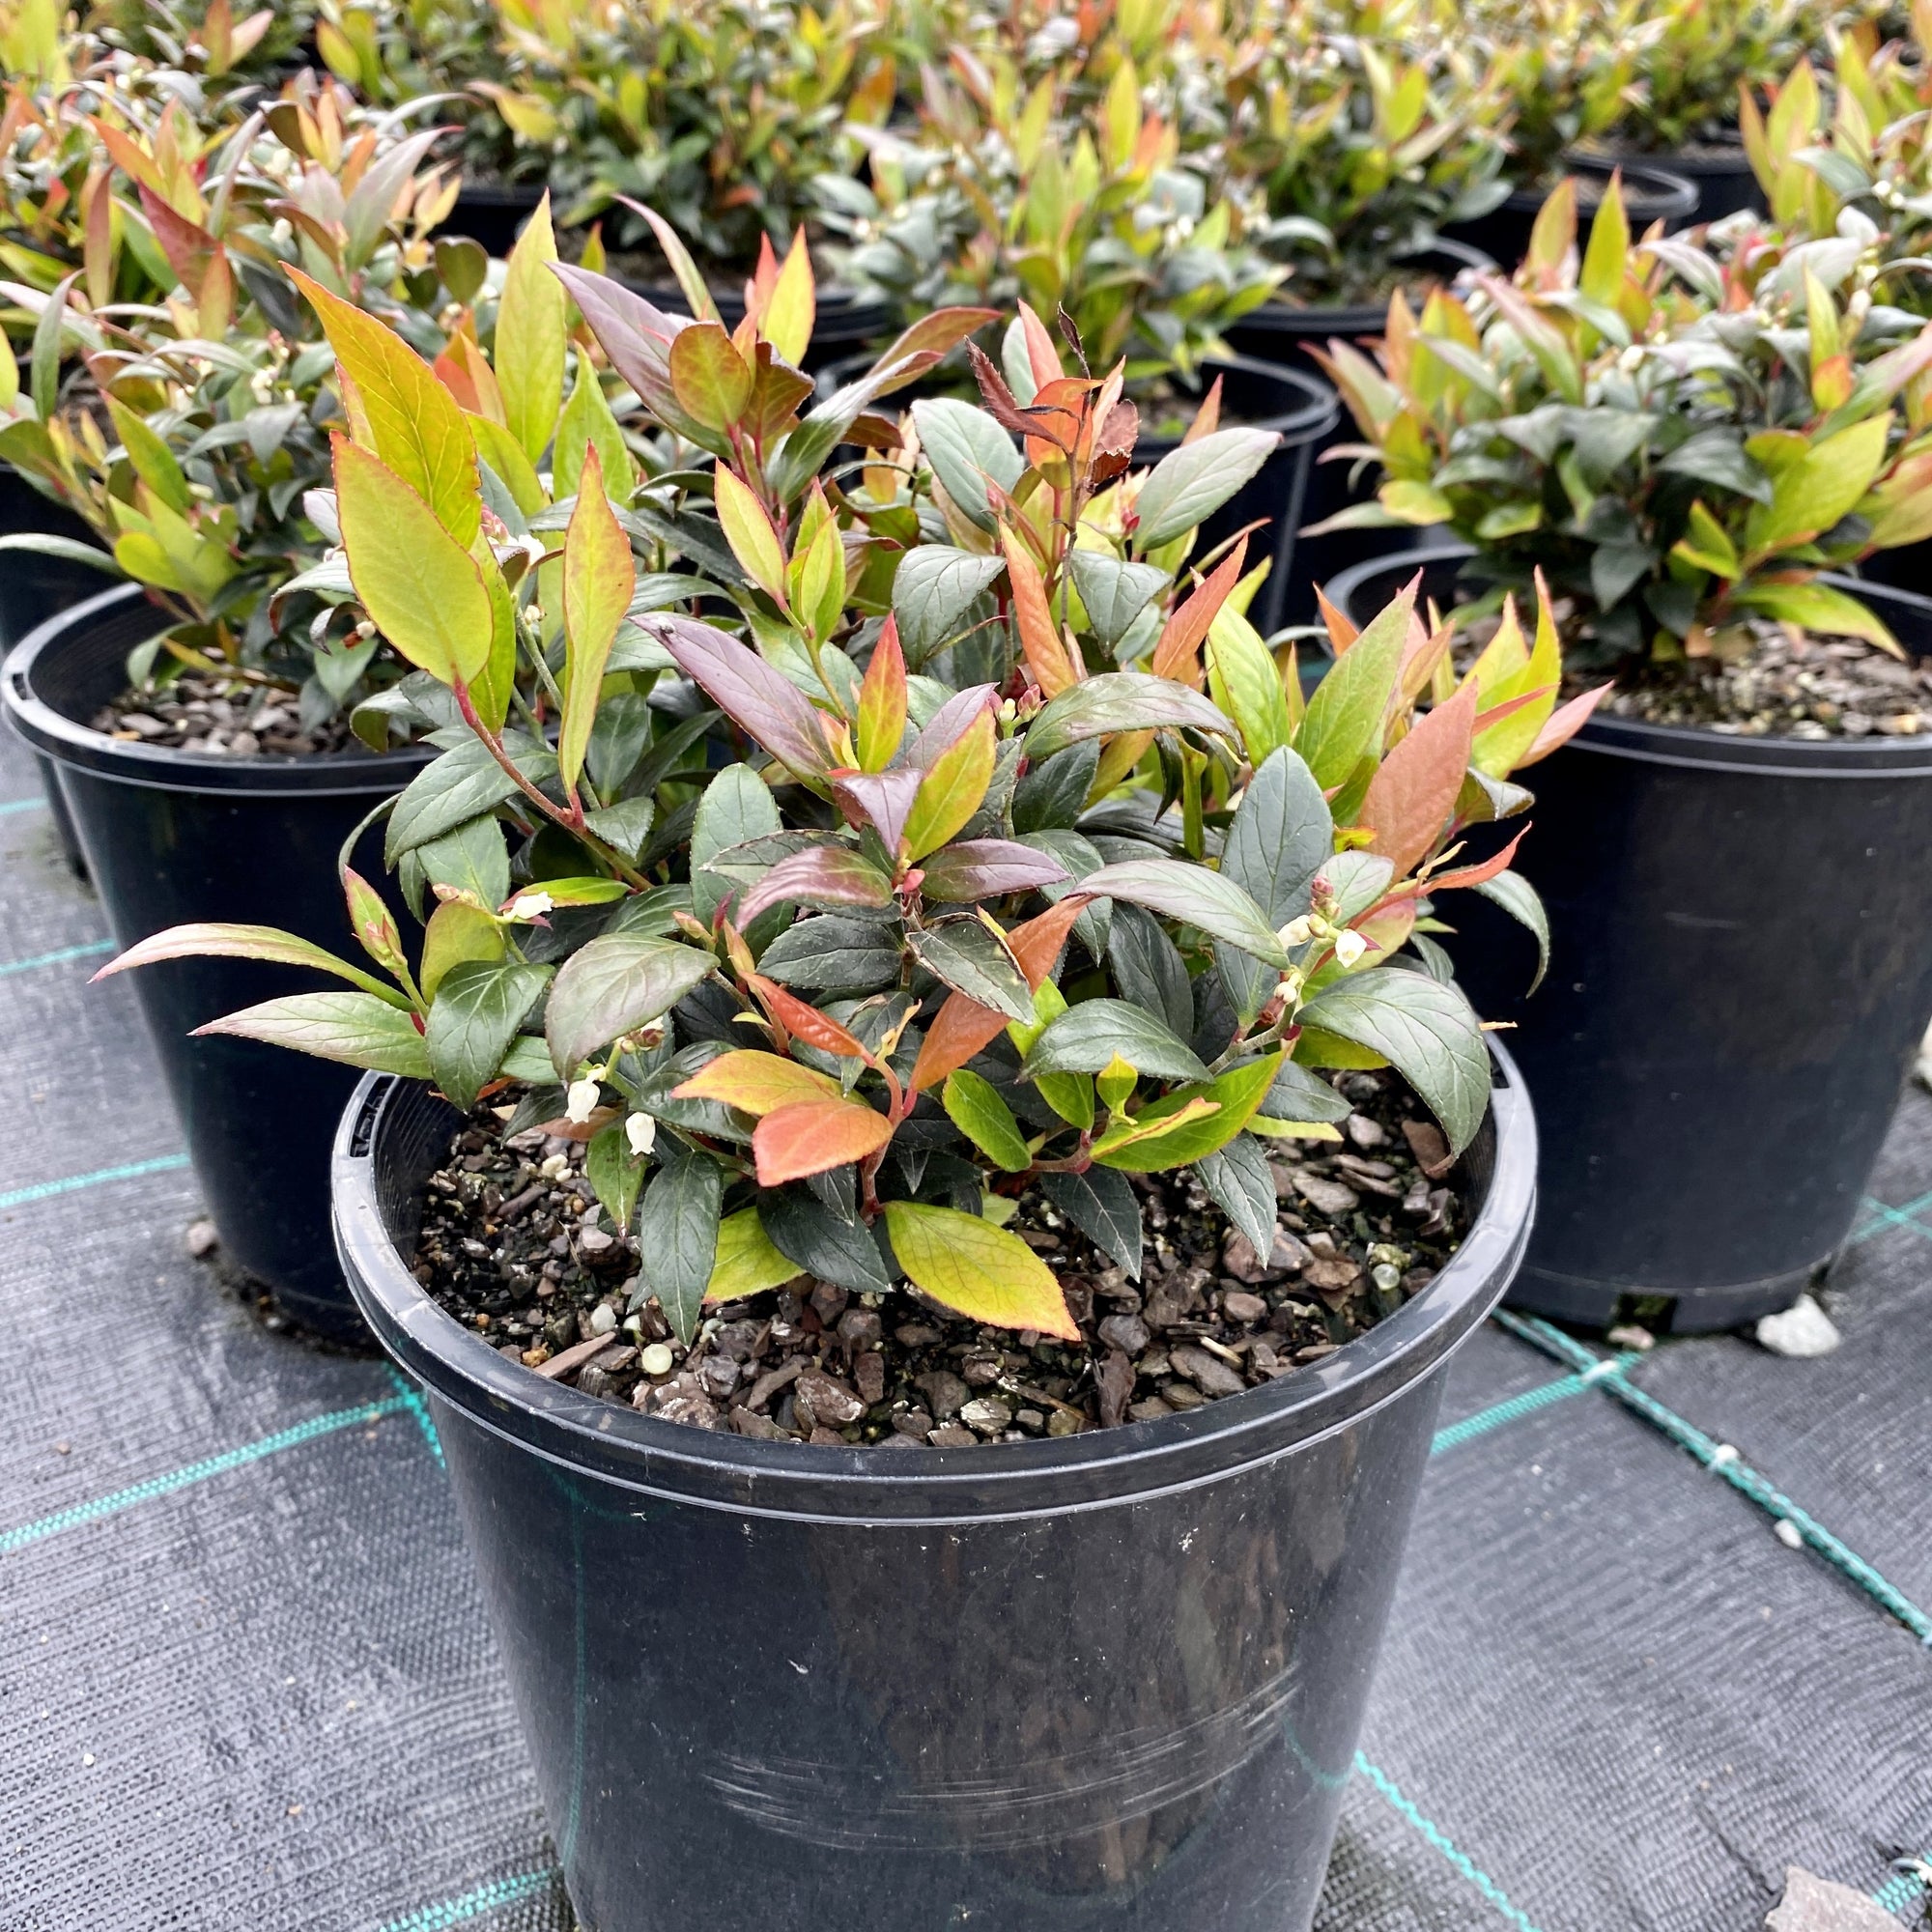 Leucothoe ‘Little Flame’ produces fiery crimson new shoots that stand out from the mature glossy green foliage beneath